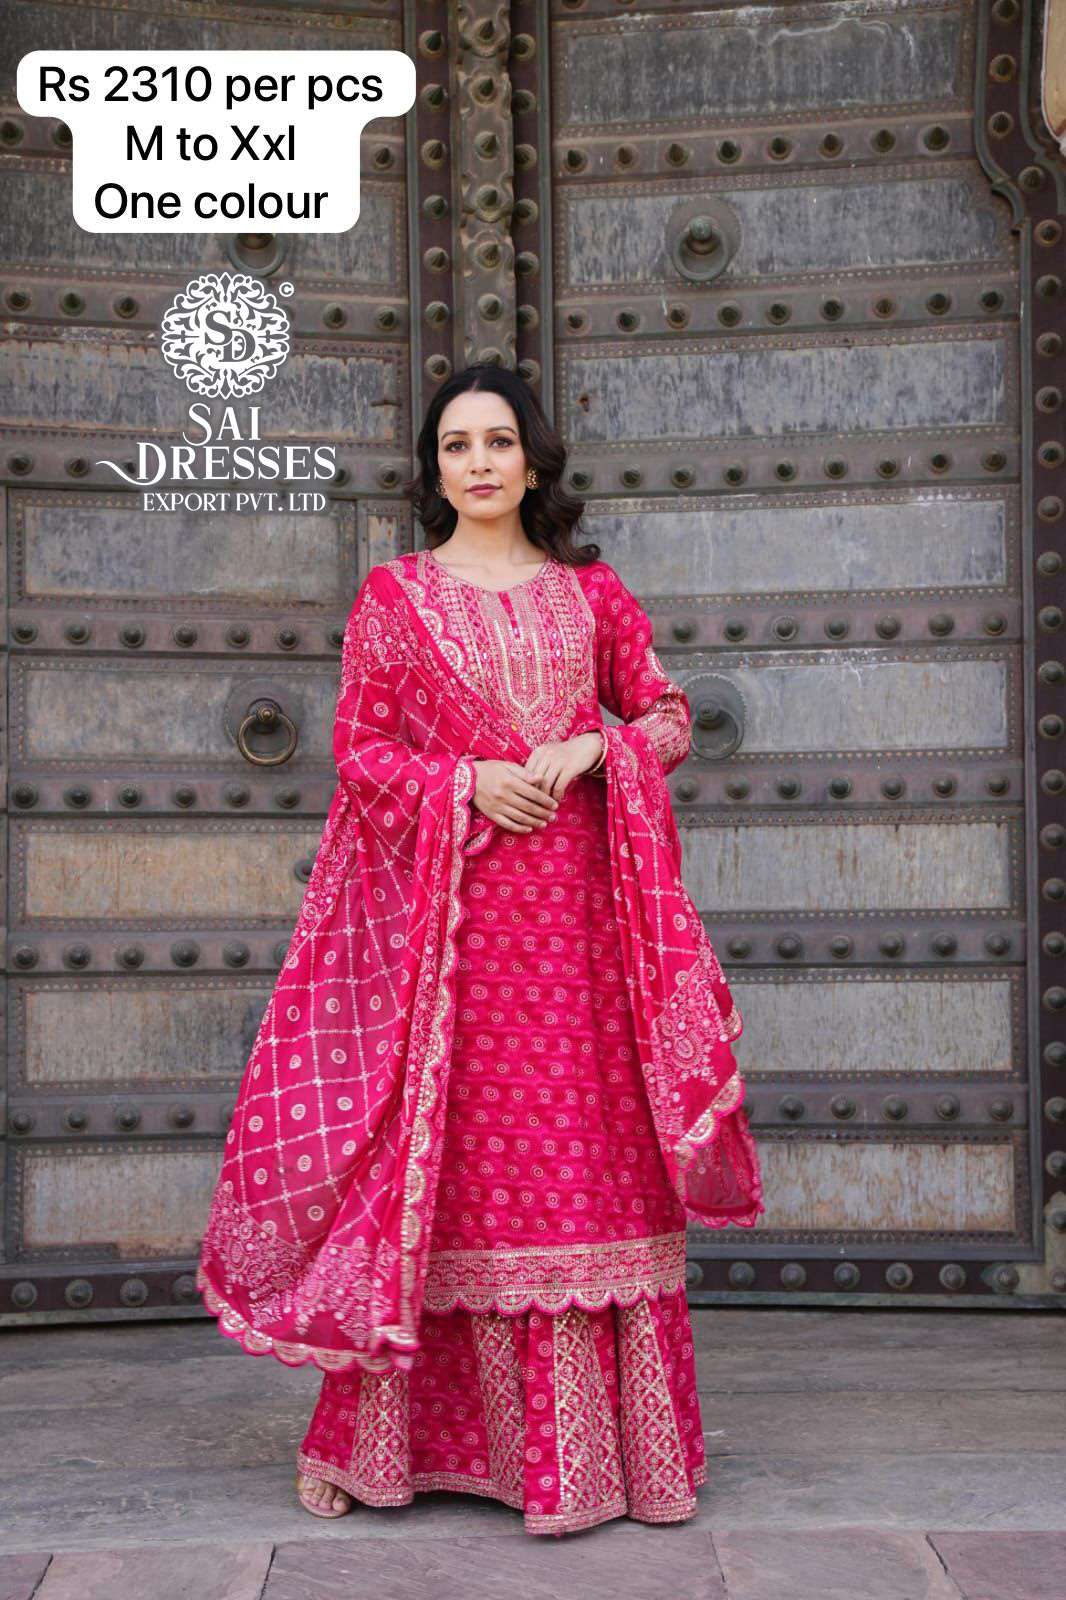 SAI DRESSES PRESENT D.NO 4007 READY TO FESTIVE WEAR STRAIGHT CUT WITH GHARARA STYLE DESIGNER 3 PIECE COMBO SUITS IN WHOLESALE RATE IN SURAT